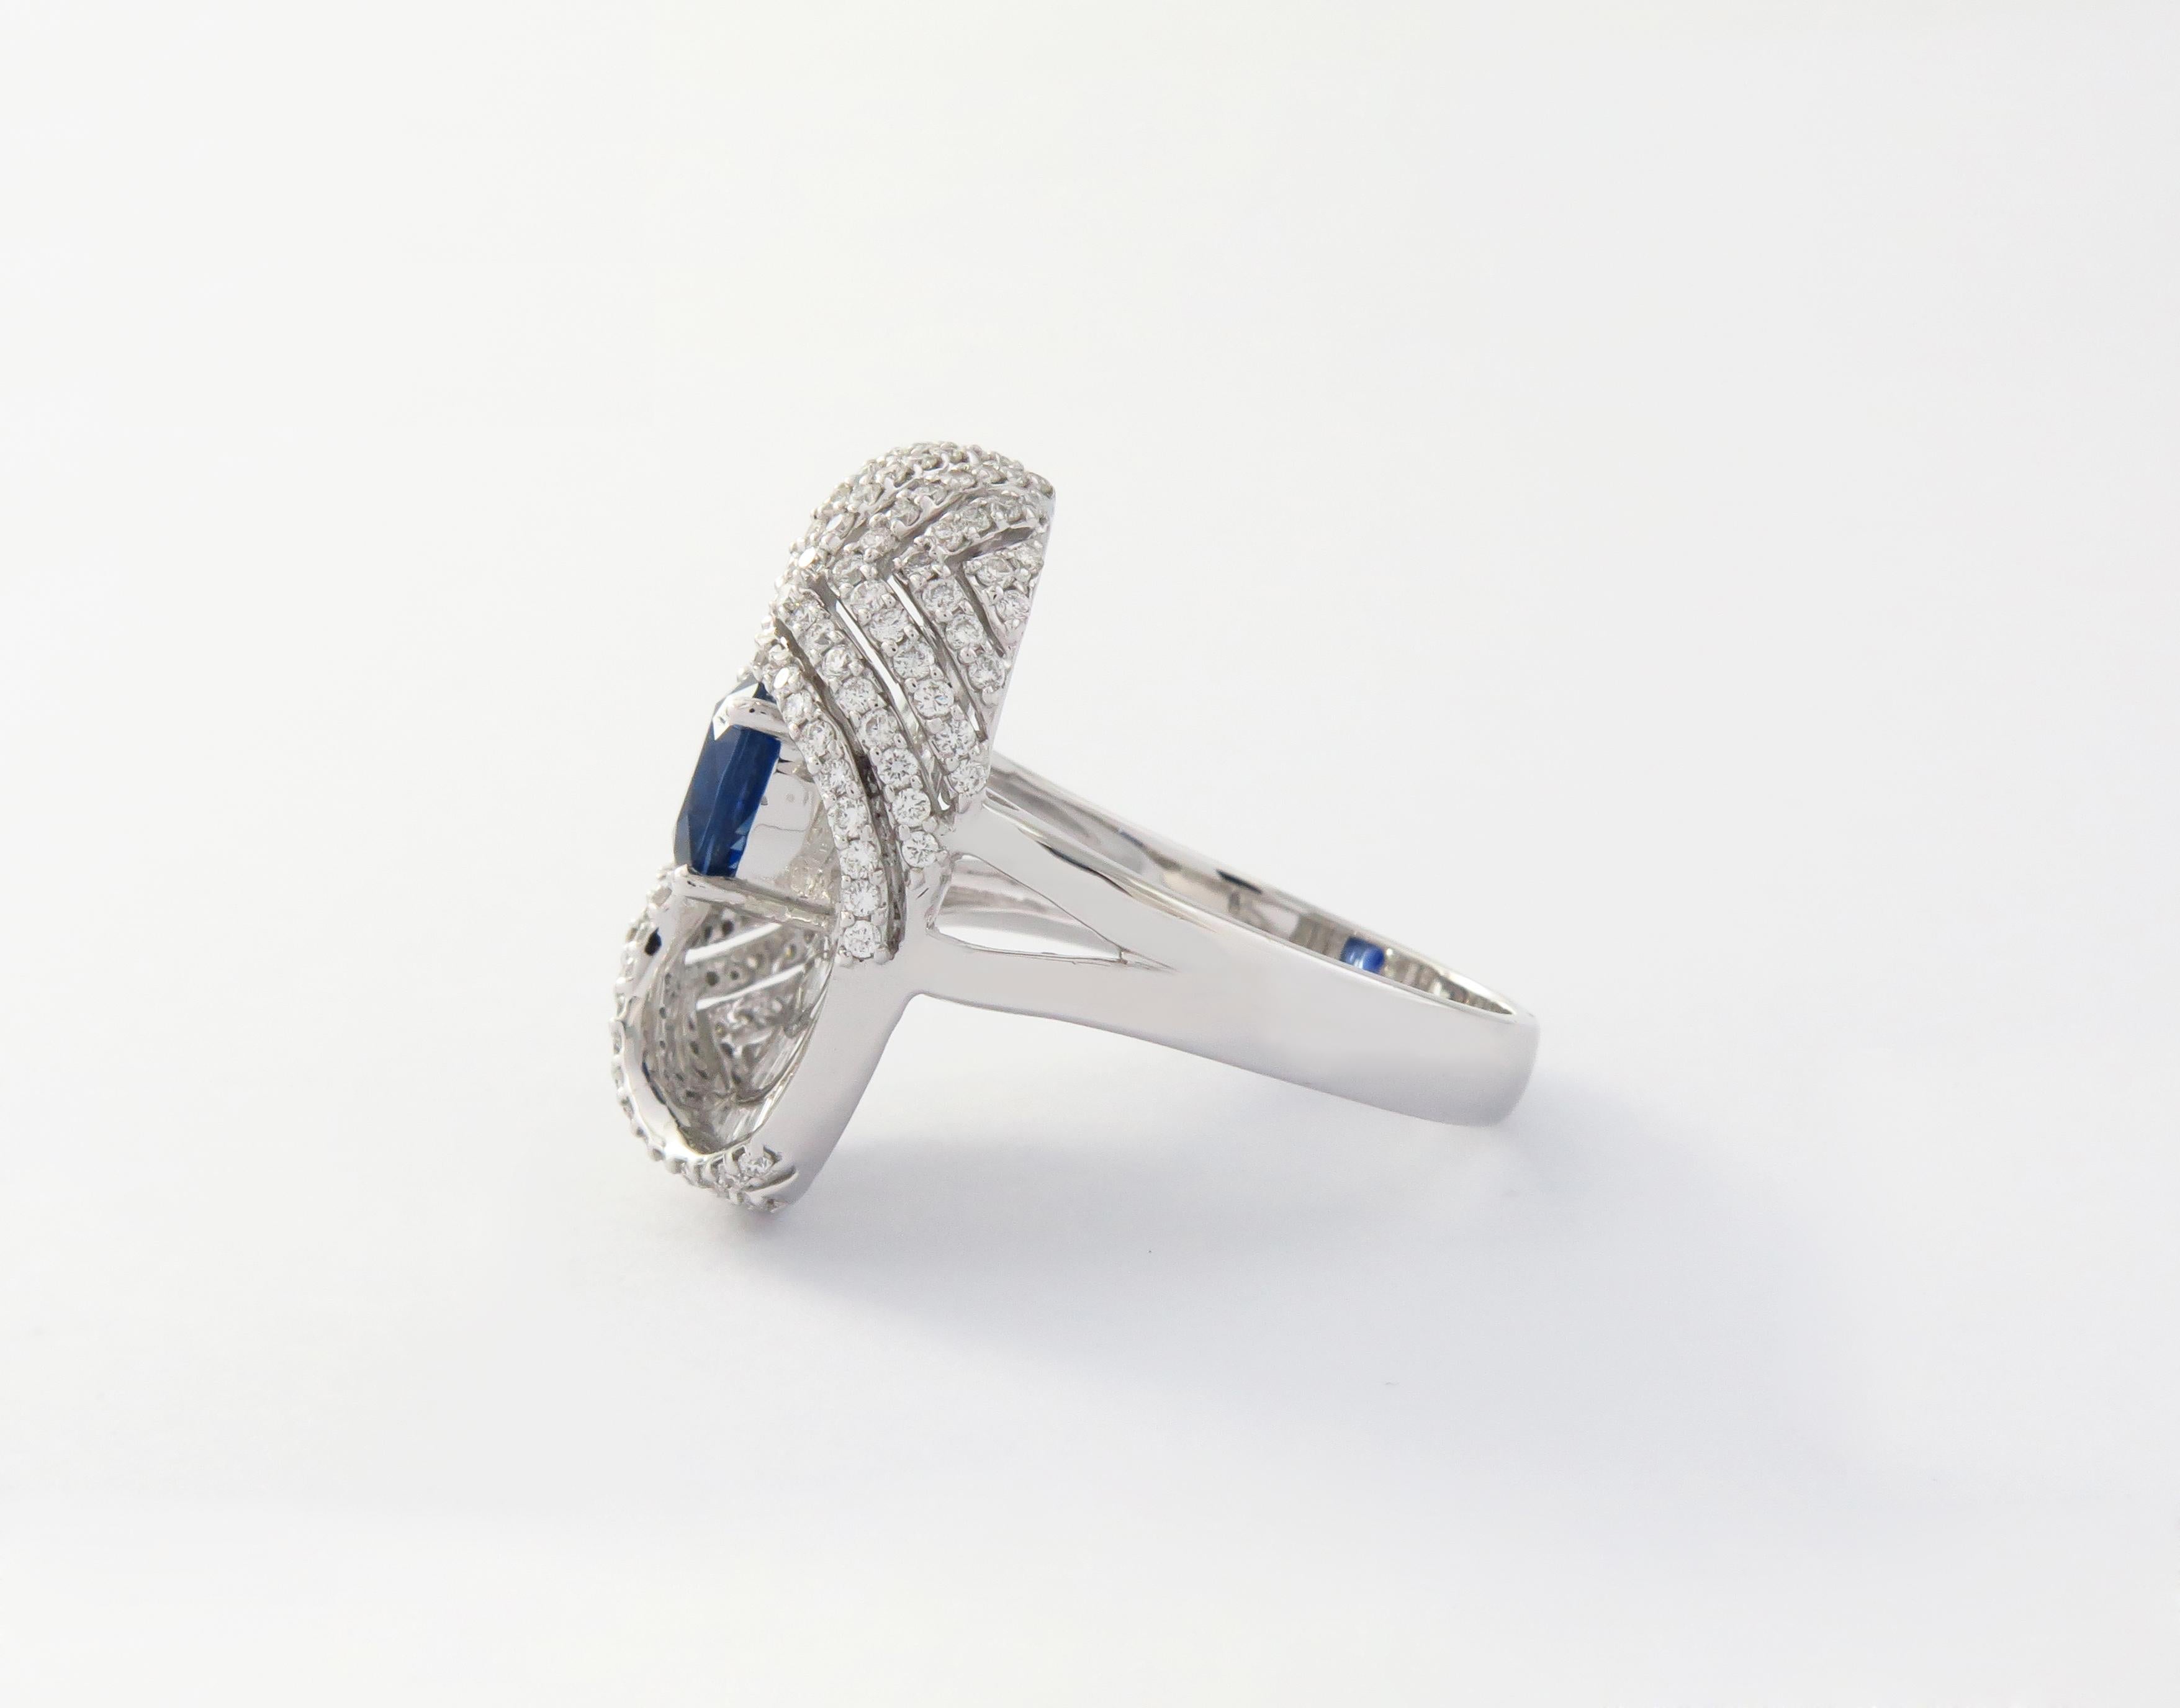 This 18K White Gold cocktail ring features a Baguette and Brilliant cut White Diamond with a Beautiful Shining Sapphire Color Stone. Combine with glamorous outfits for a show-stopping effect. Each diamond hand-selected by our experts for its